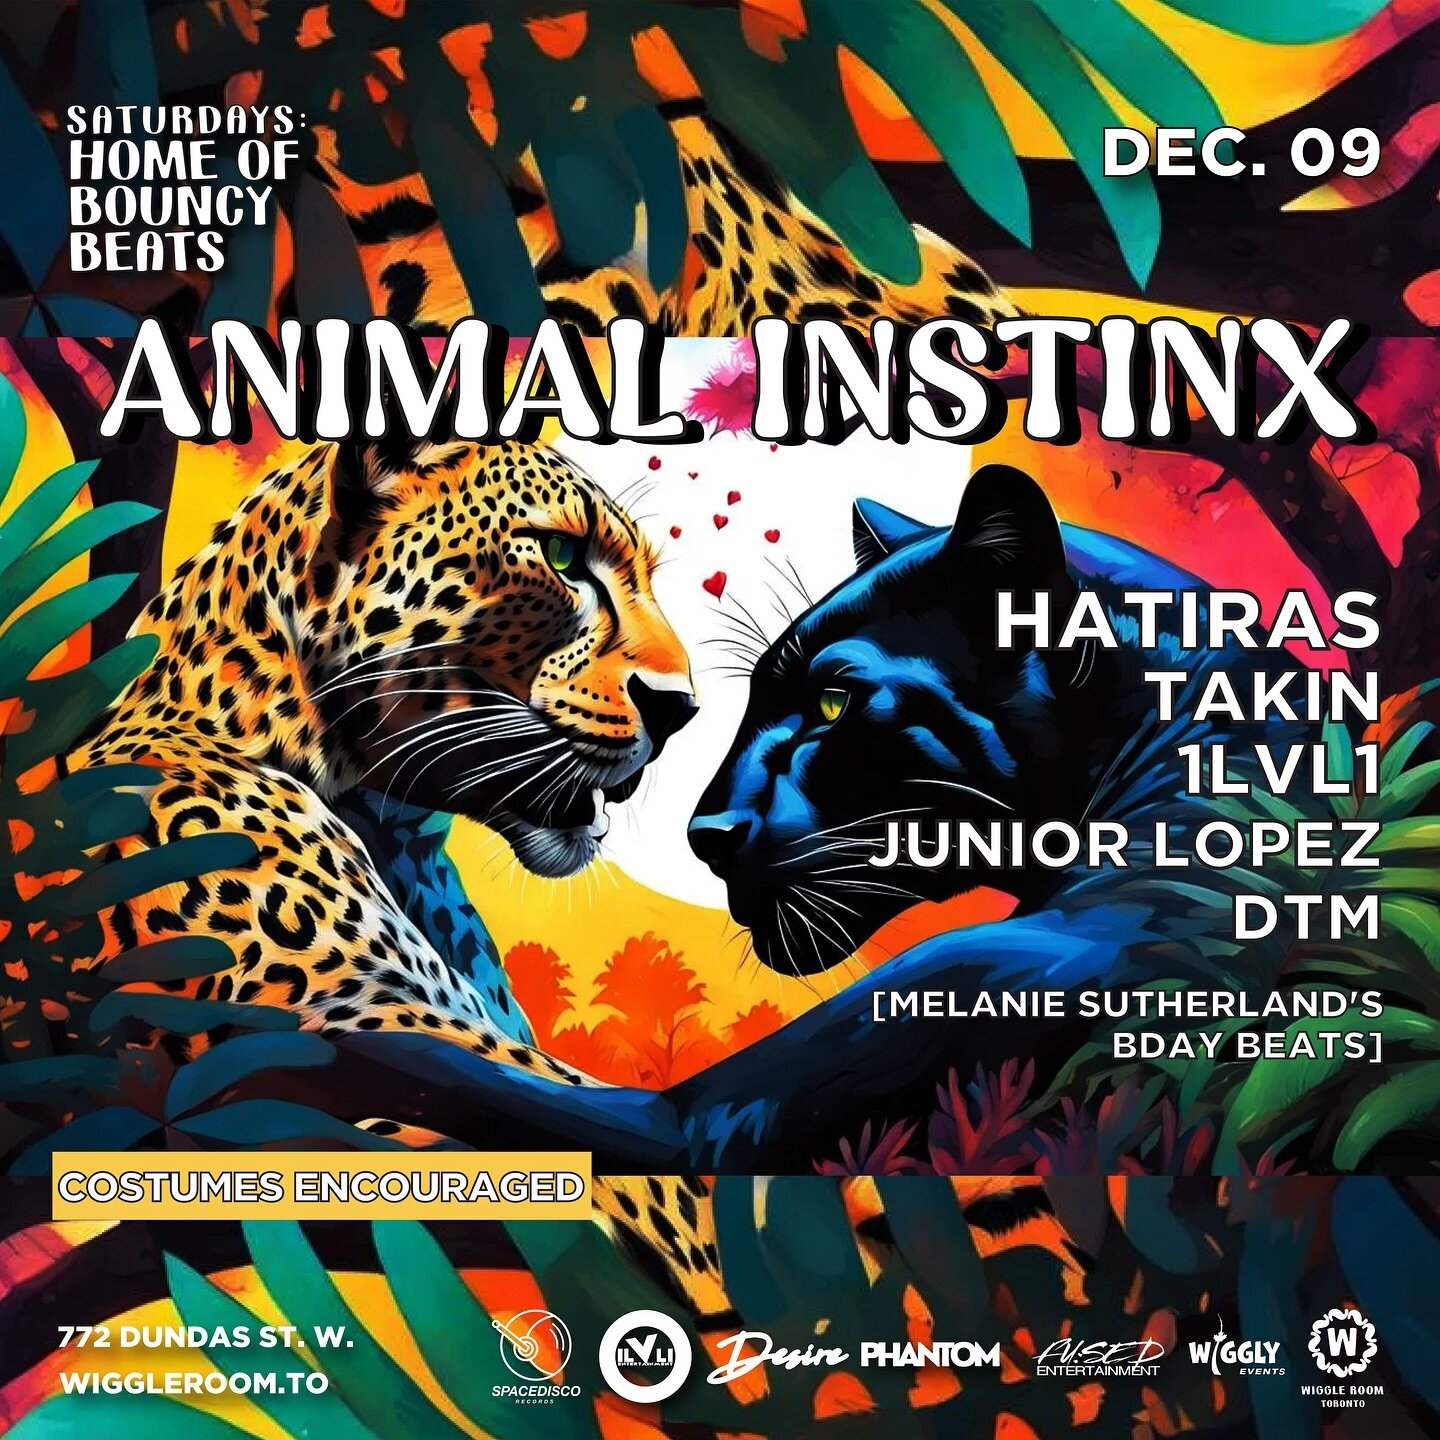 Toronto, Sat Dec 9 / HATIRAS / TAKiN / Junior Lopez / 1lvl1 / DTM

Release your natural Animal Instinx at our dress up party with Desire Events,&nbsp;#1lvl1 Entertainment, and the Wiggly crew. Costumes are highly encouraged. Featuring Canadian House 